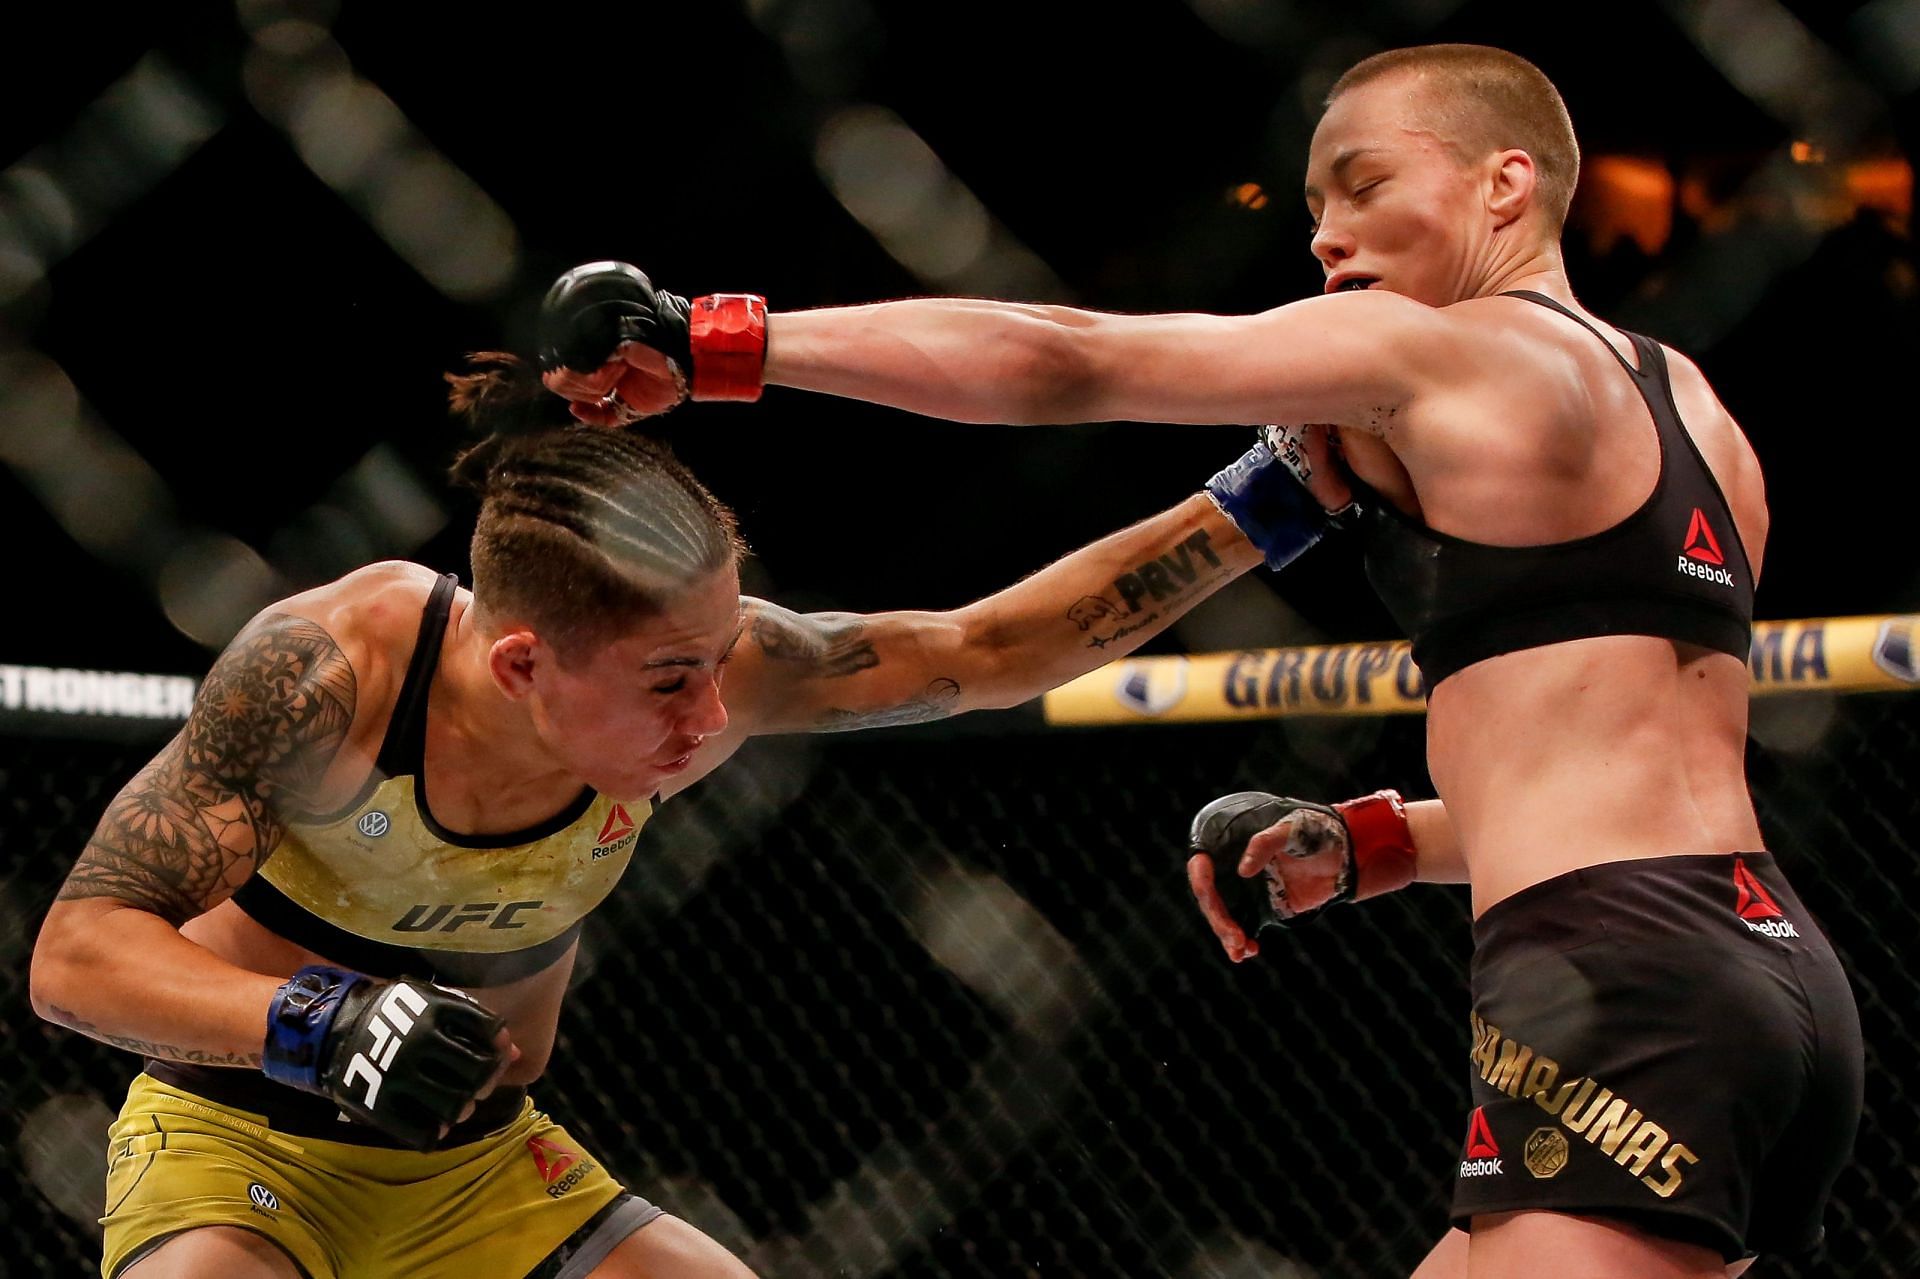 The series between Andrade and Namajunas is tied at 1-1